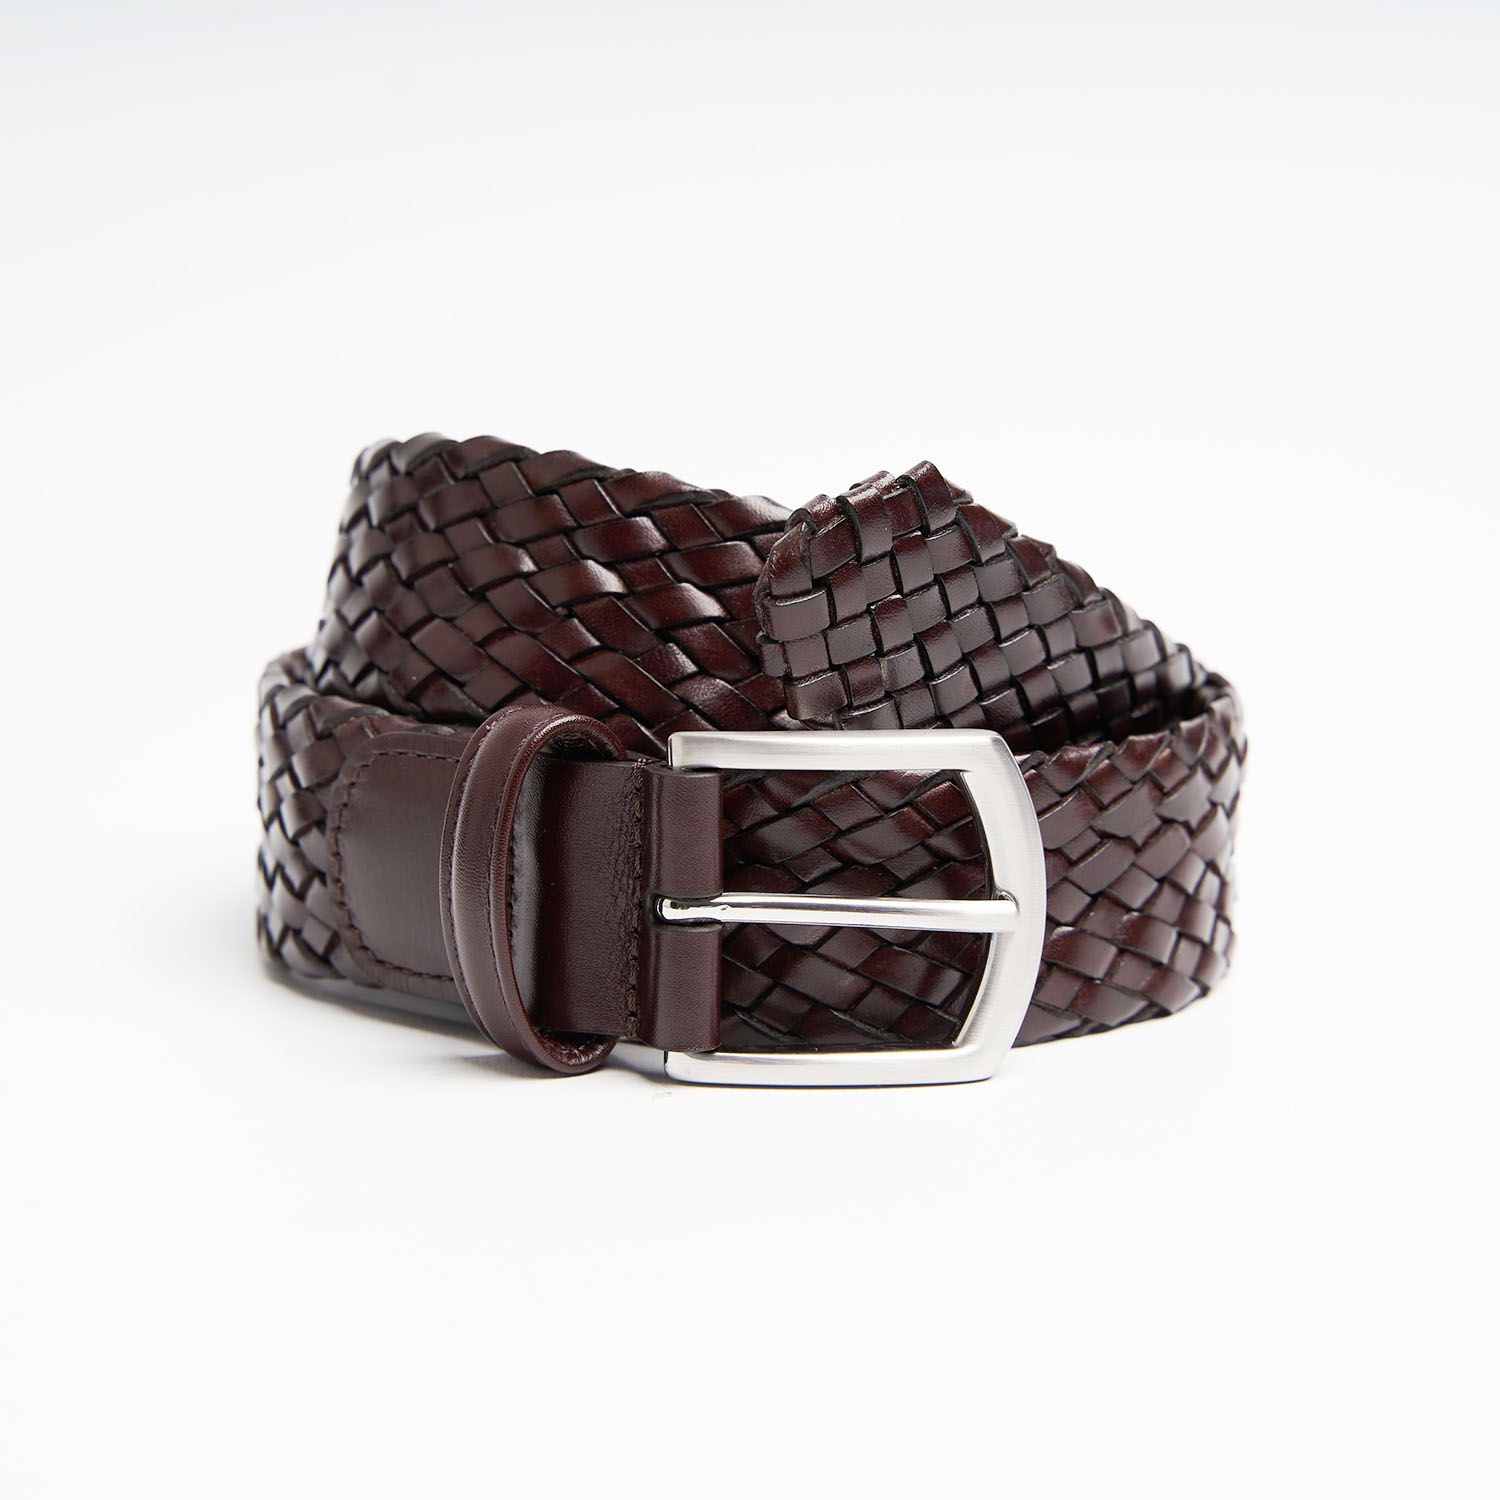 HAND-WOVEN LEATHER BELT 35 MM